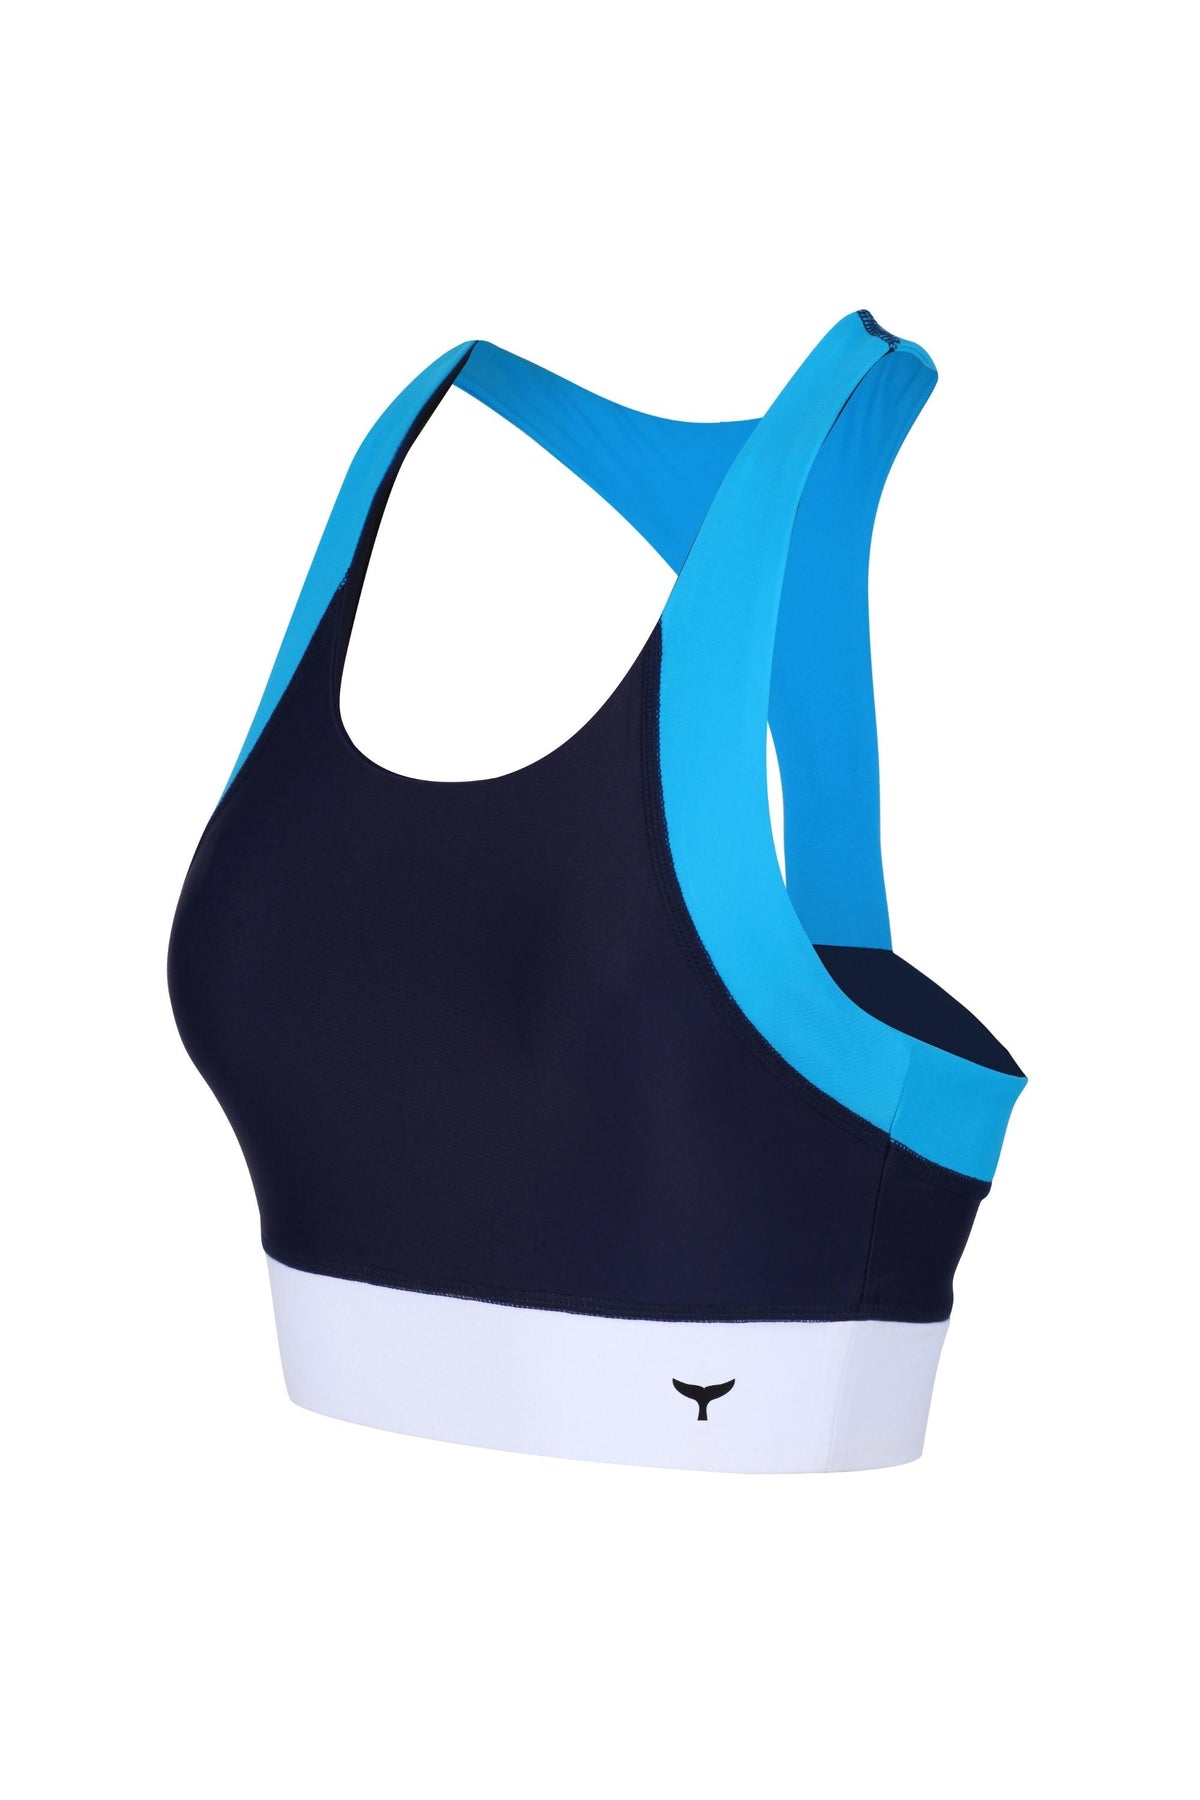 Octavia Sports Bra - Navy - Whale Of A Time Clothing